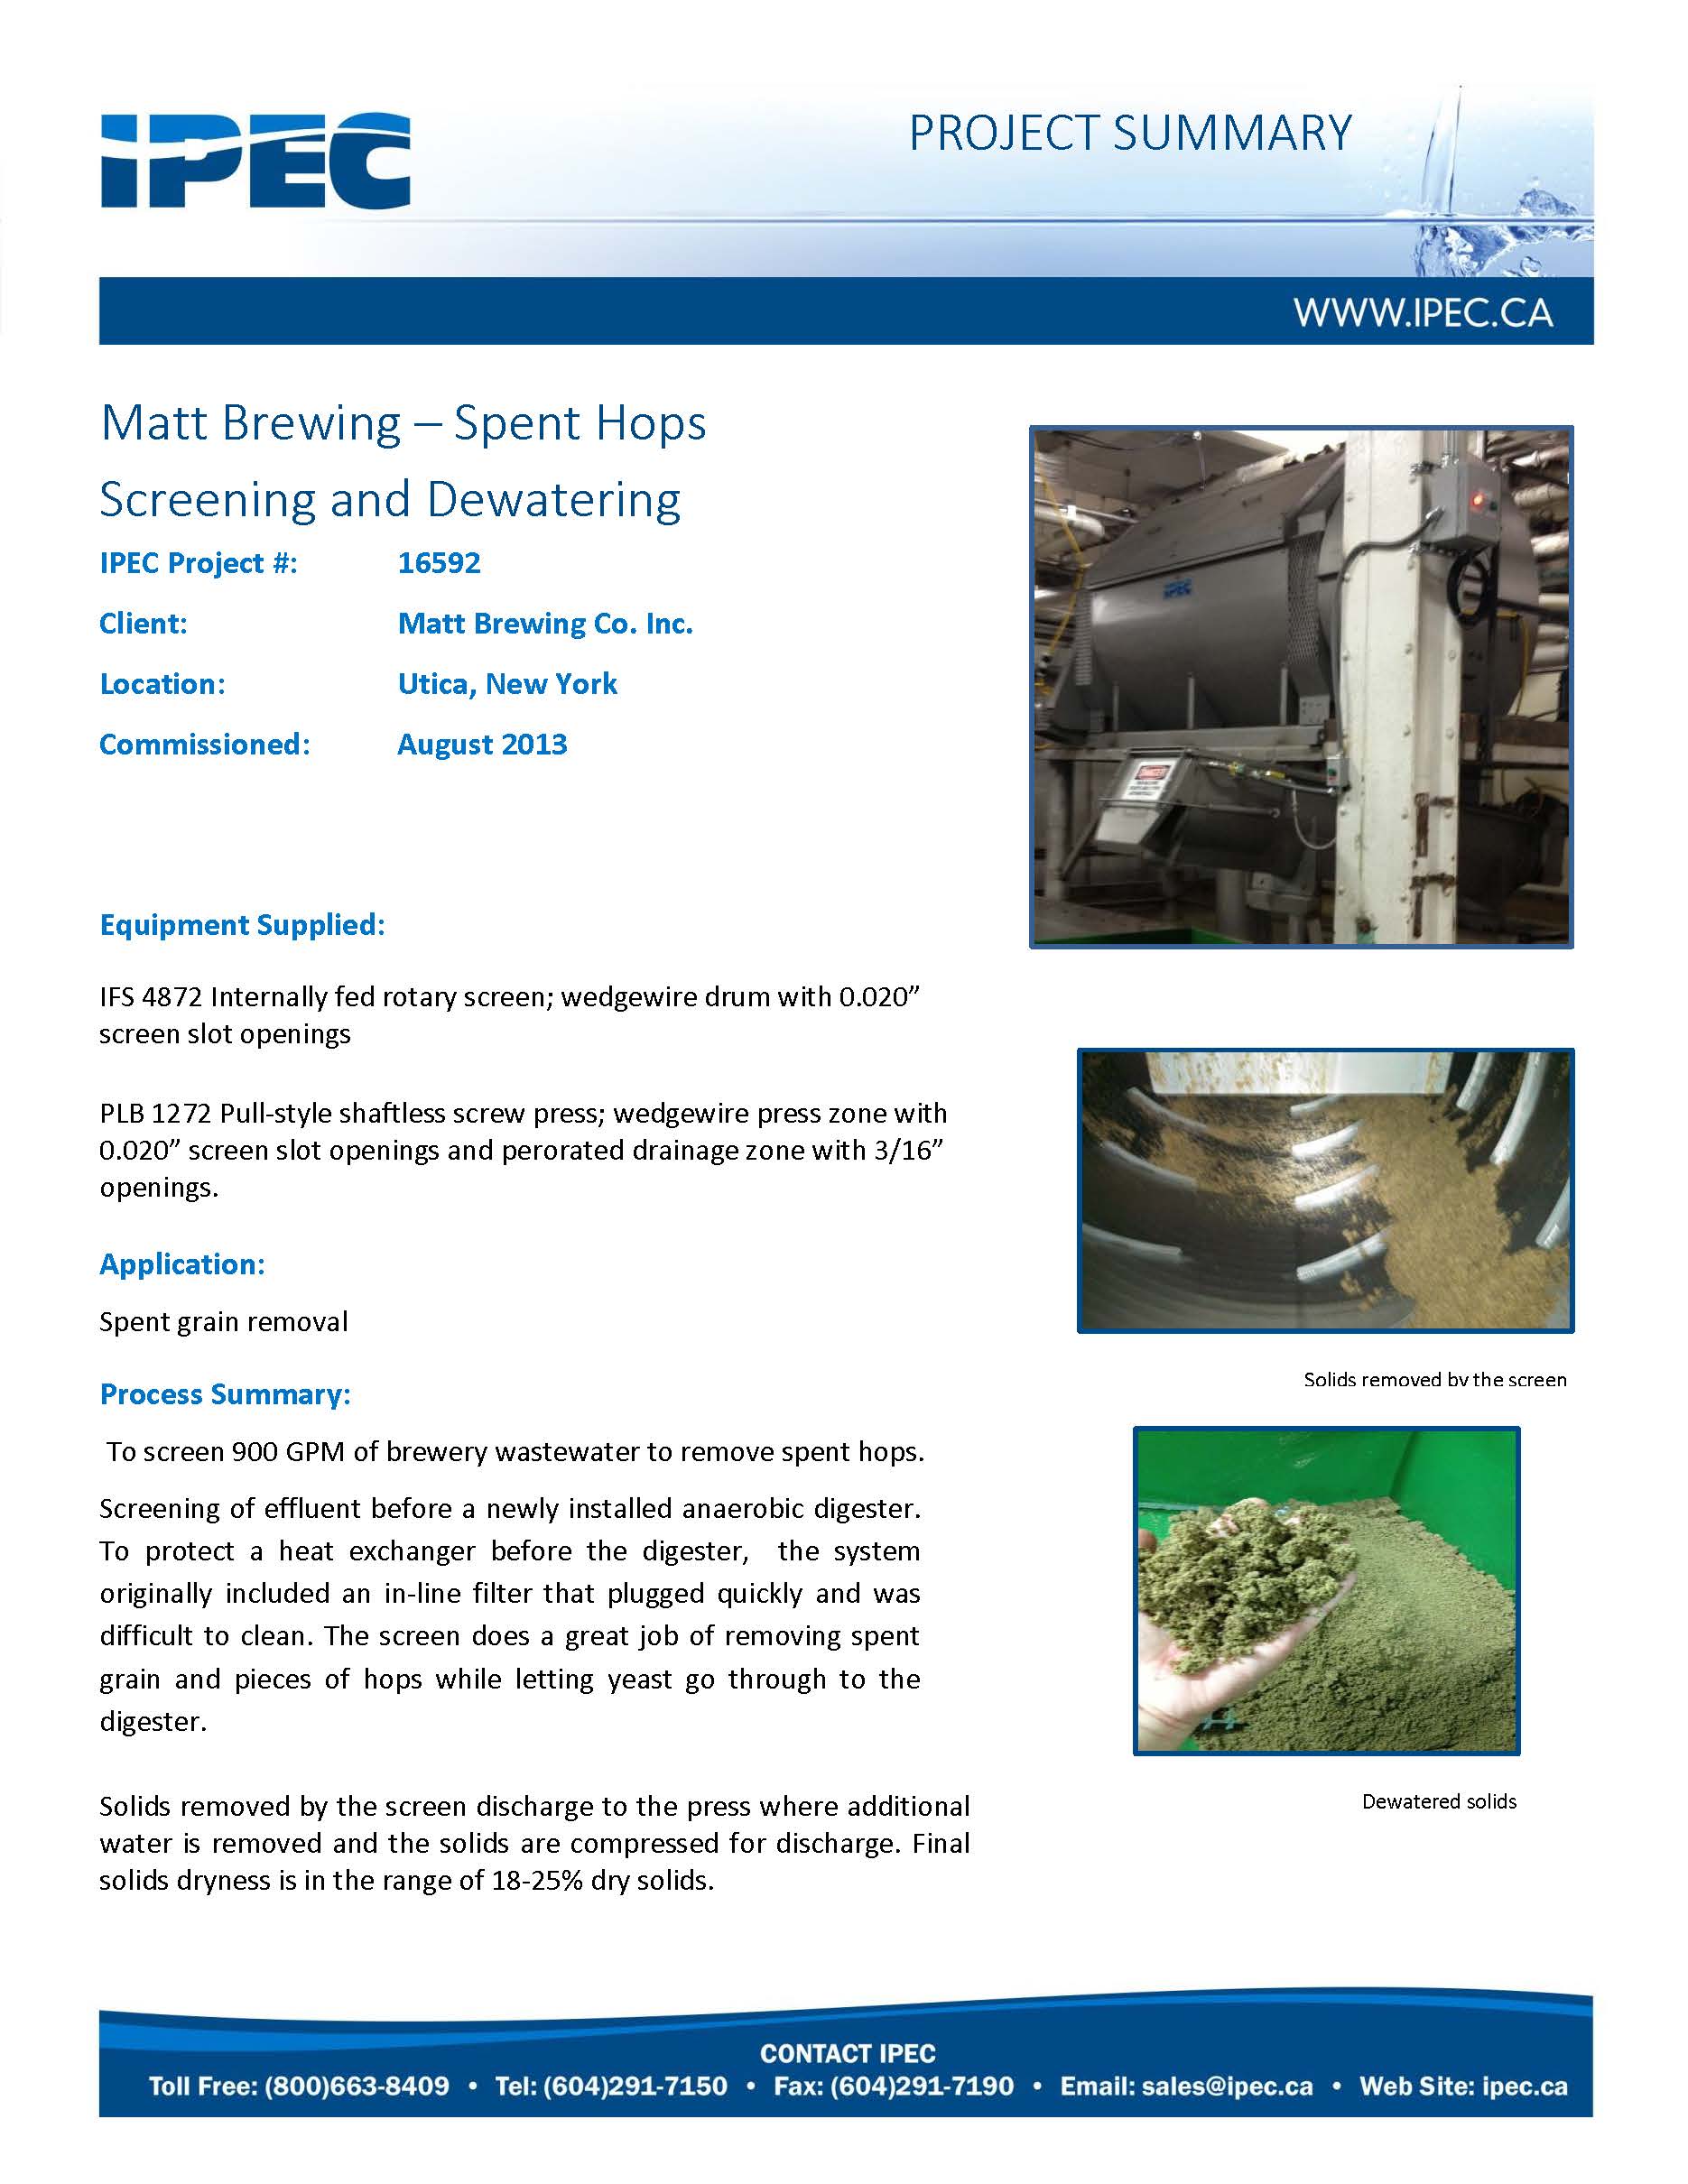 Case Study: Brewery Spent Hops Screening and Dewatering